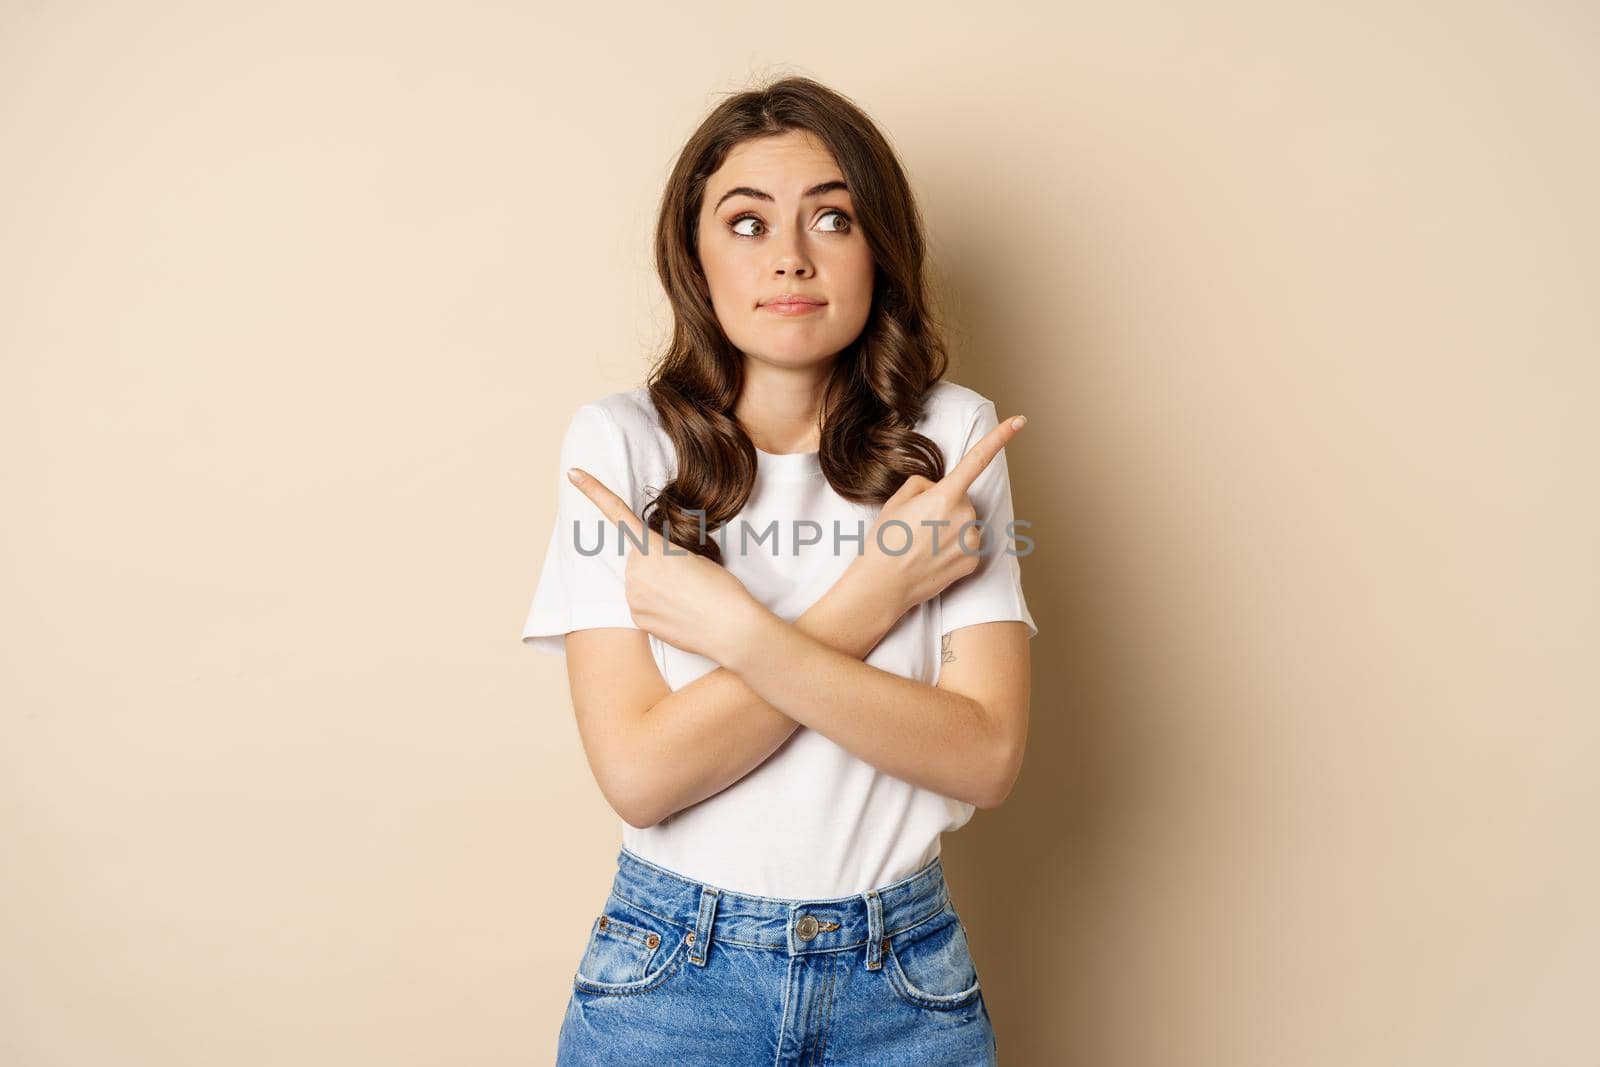 Beautiful girl choosing between two options, pointing sideways and looking clueless, standing over beige background.